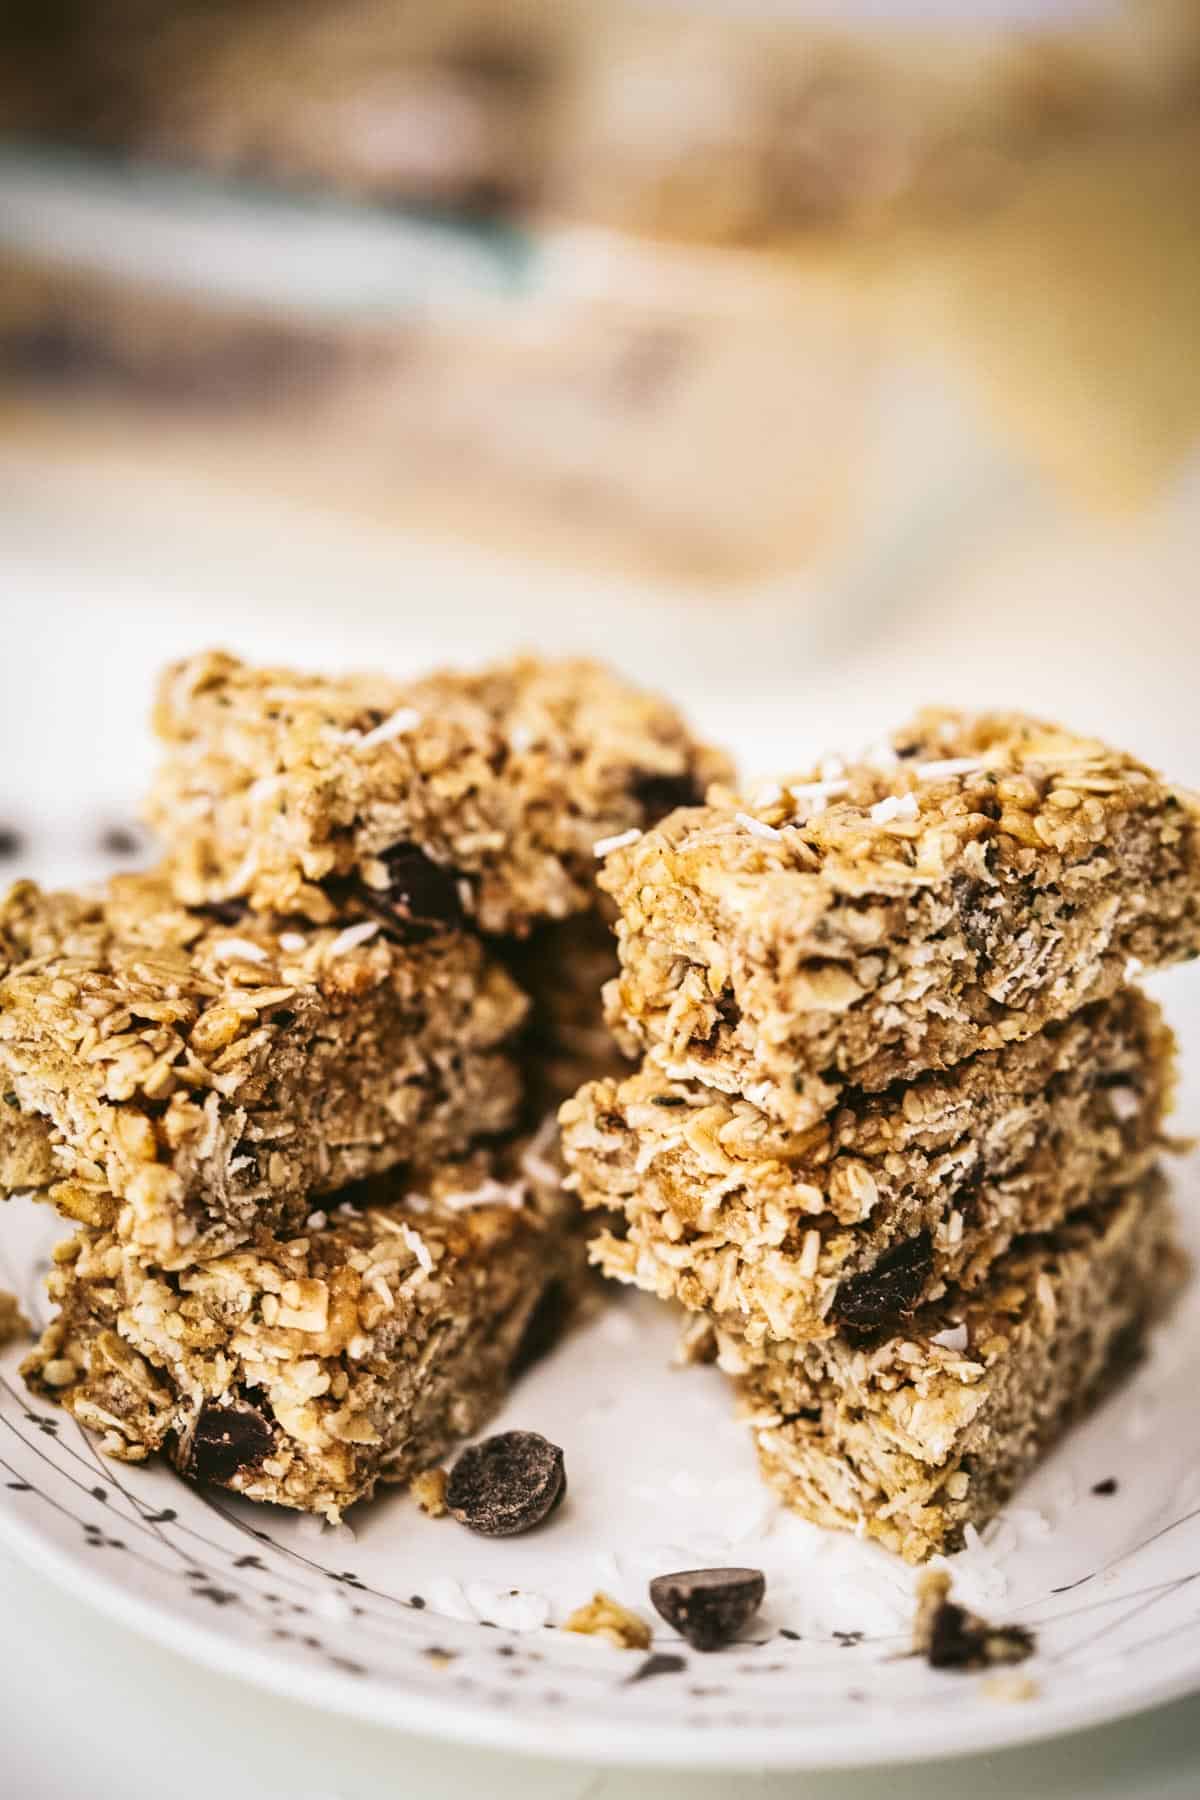 Chewy chocolate chip granola bars in three stacks on a plate